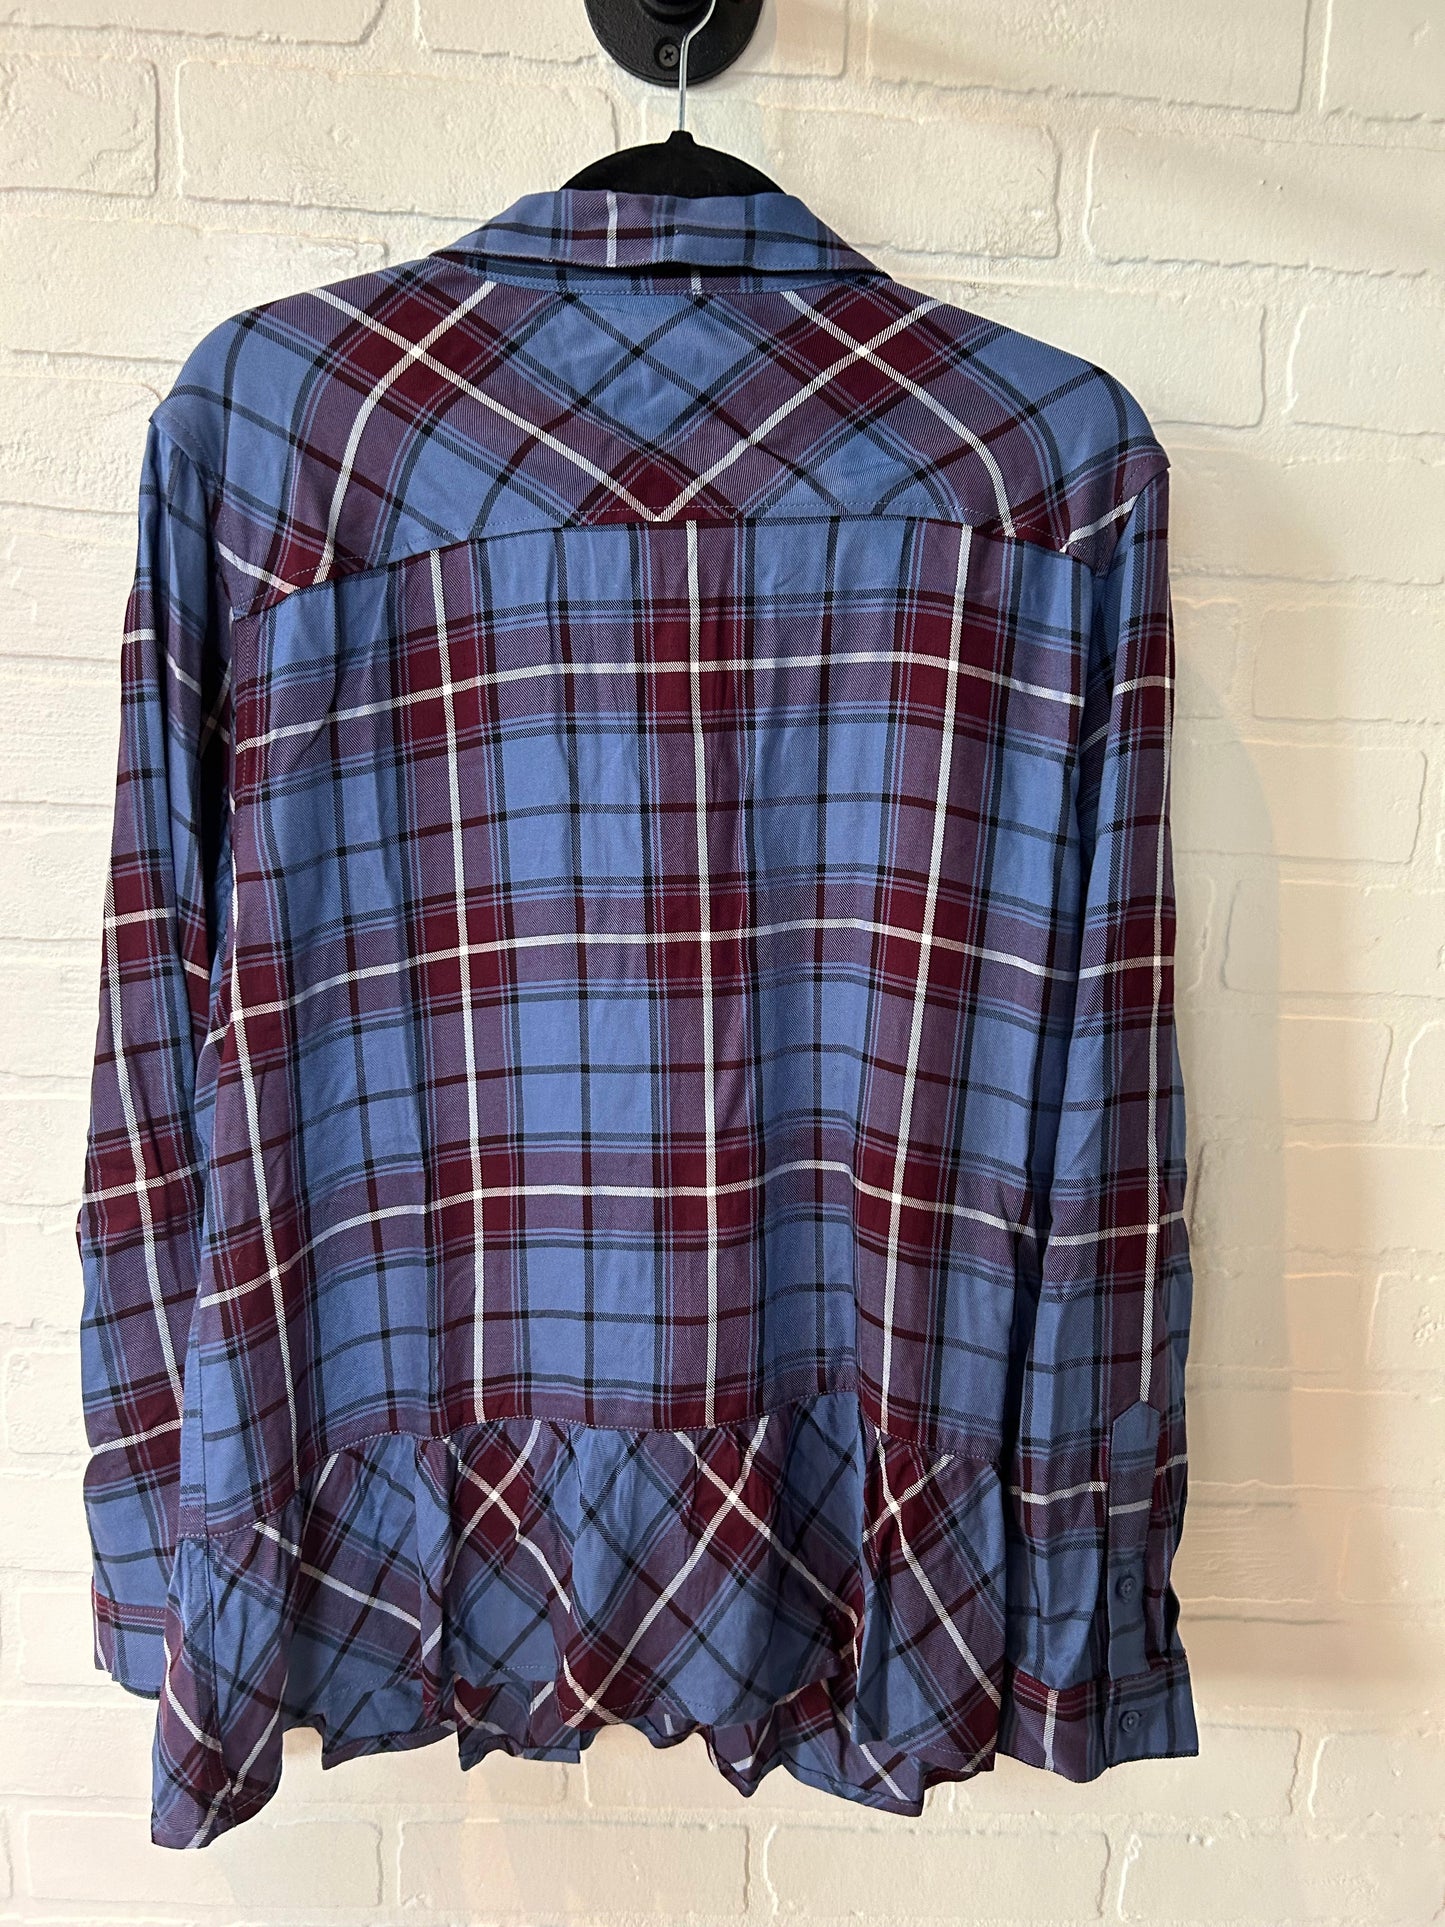 Plaid Top Long Sleeve Christopher And Banks, Size Xl